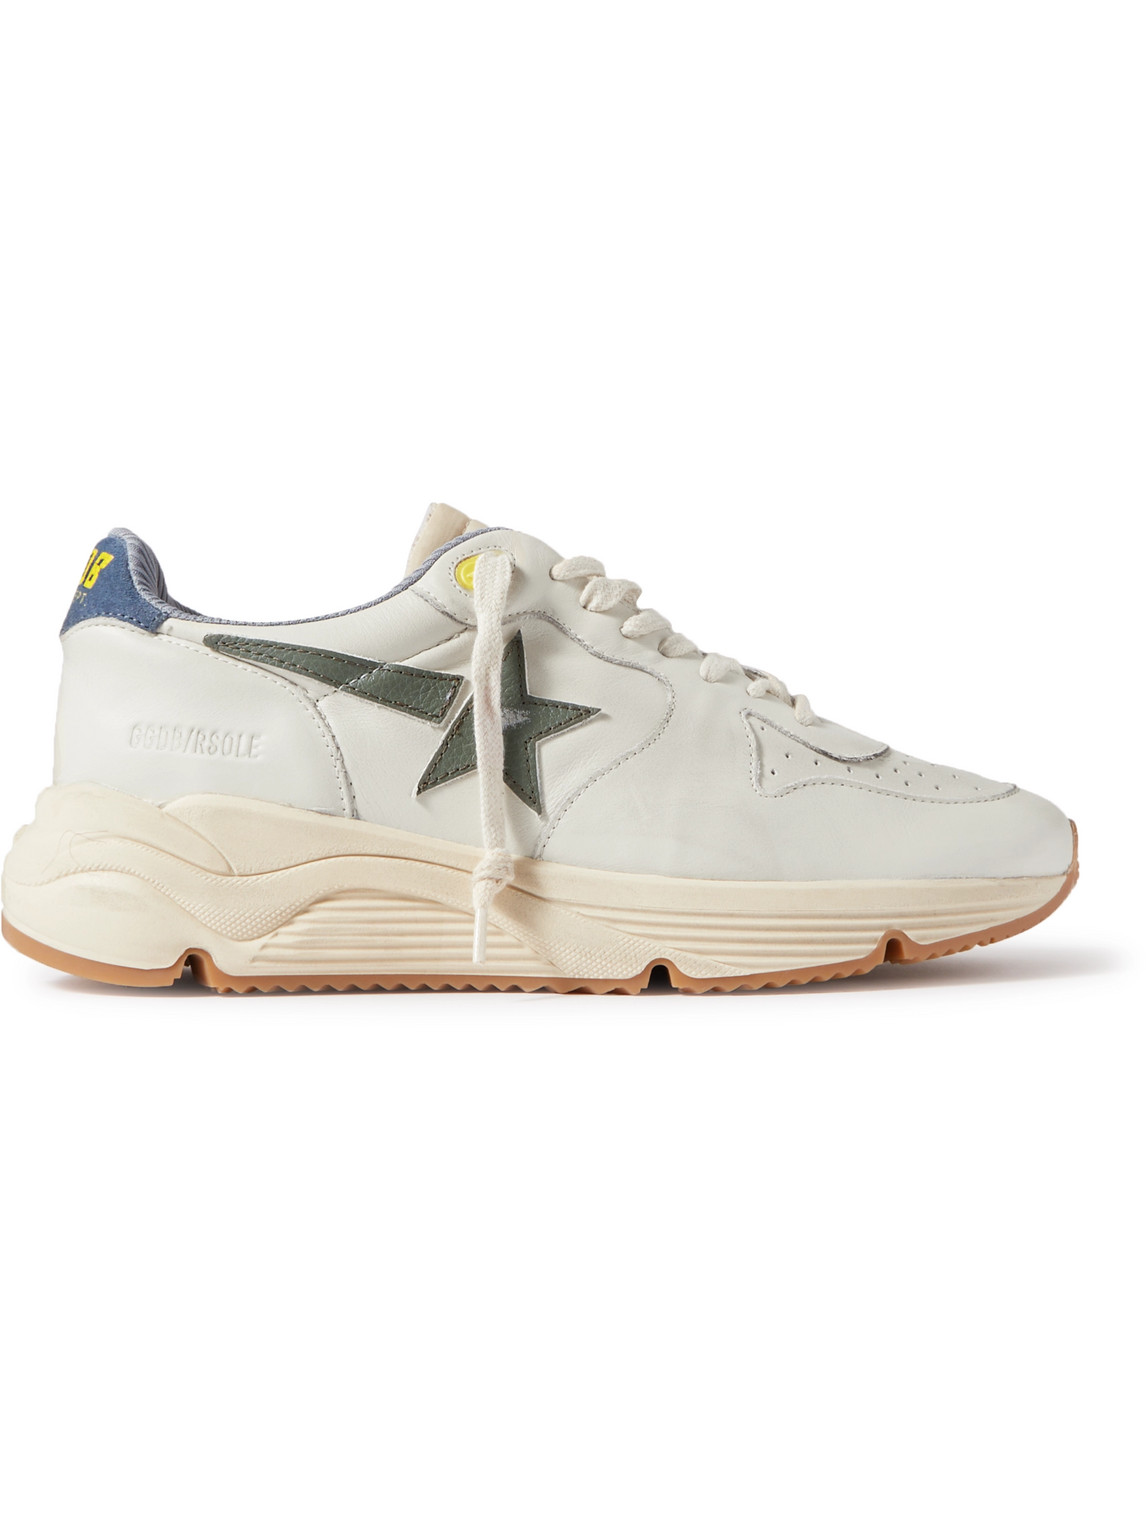 Shop Golden Goose Running Sole Distressed Leather, Nylon And Suede Sneakers In White